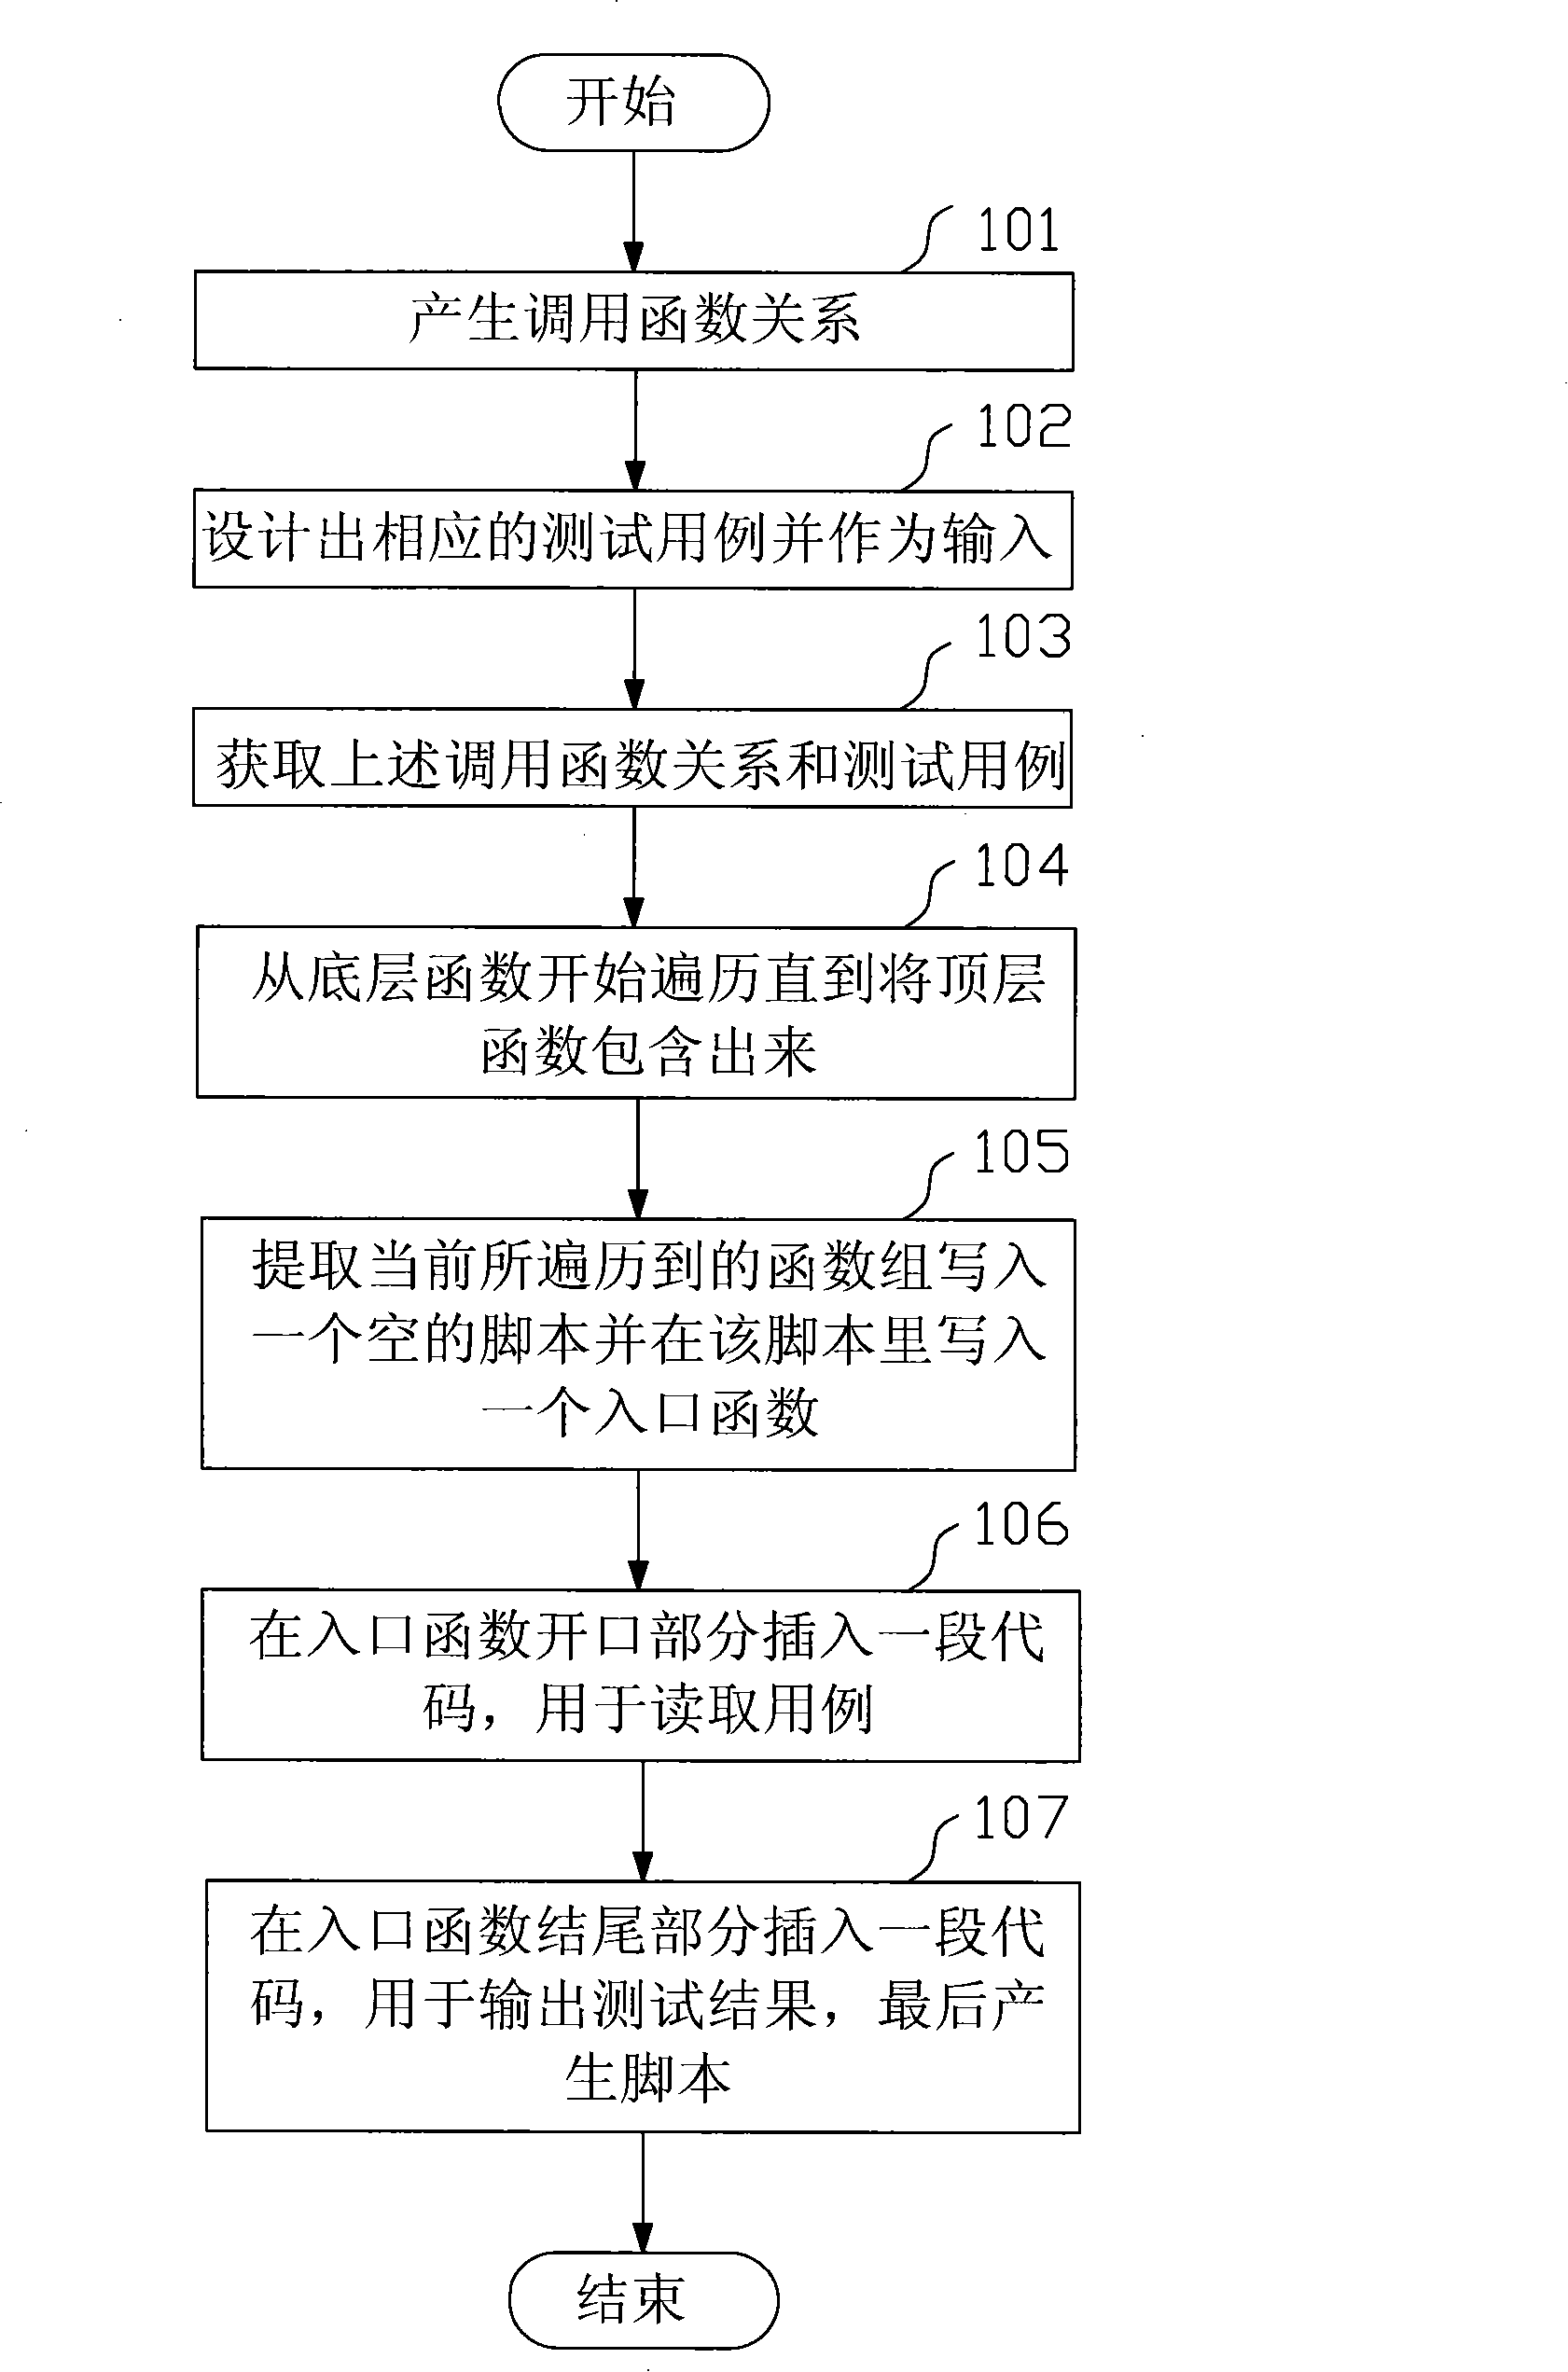 Method for generating and using automatic test script